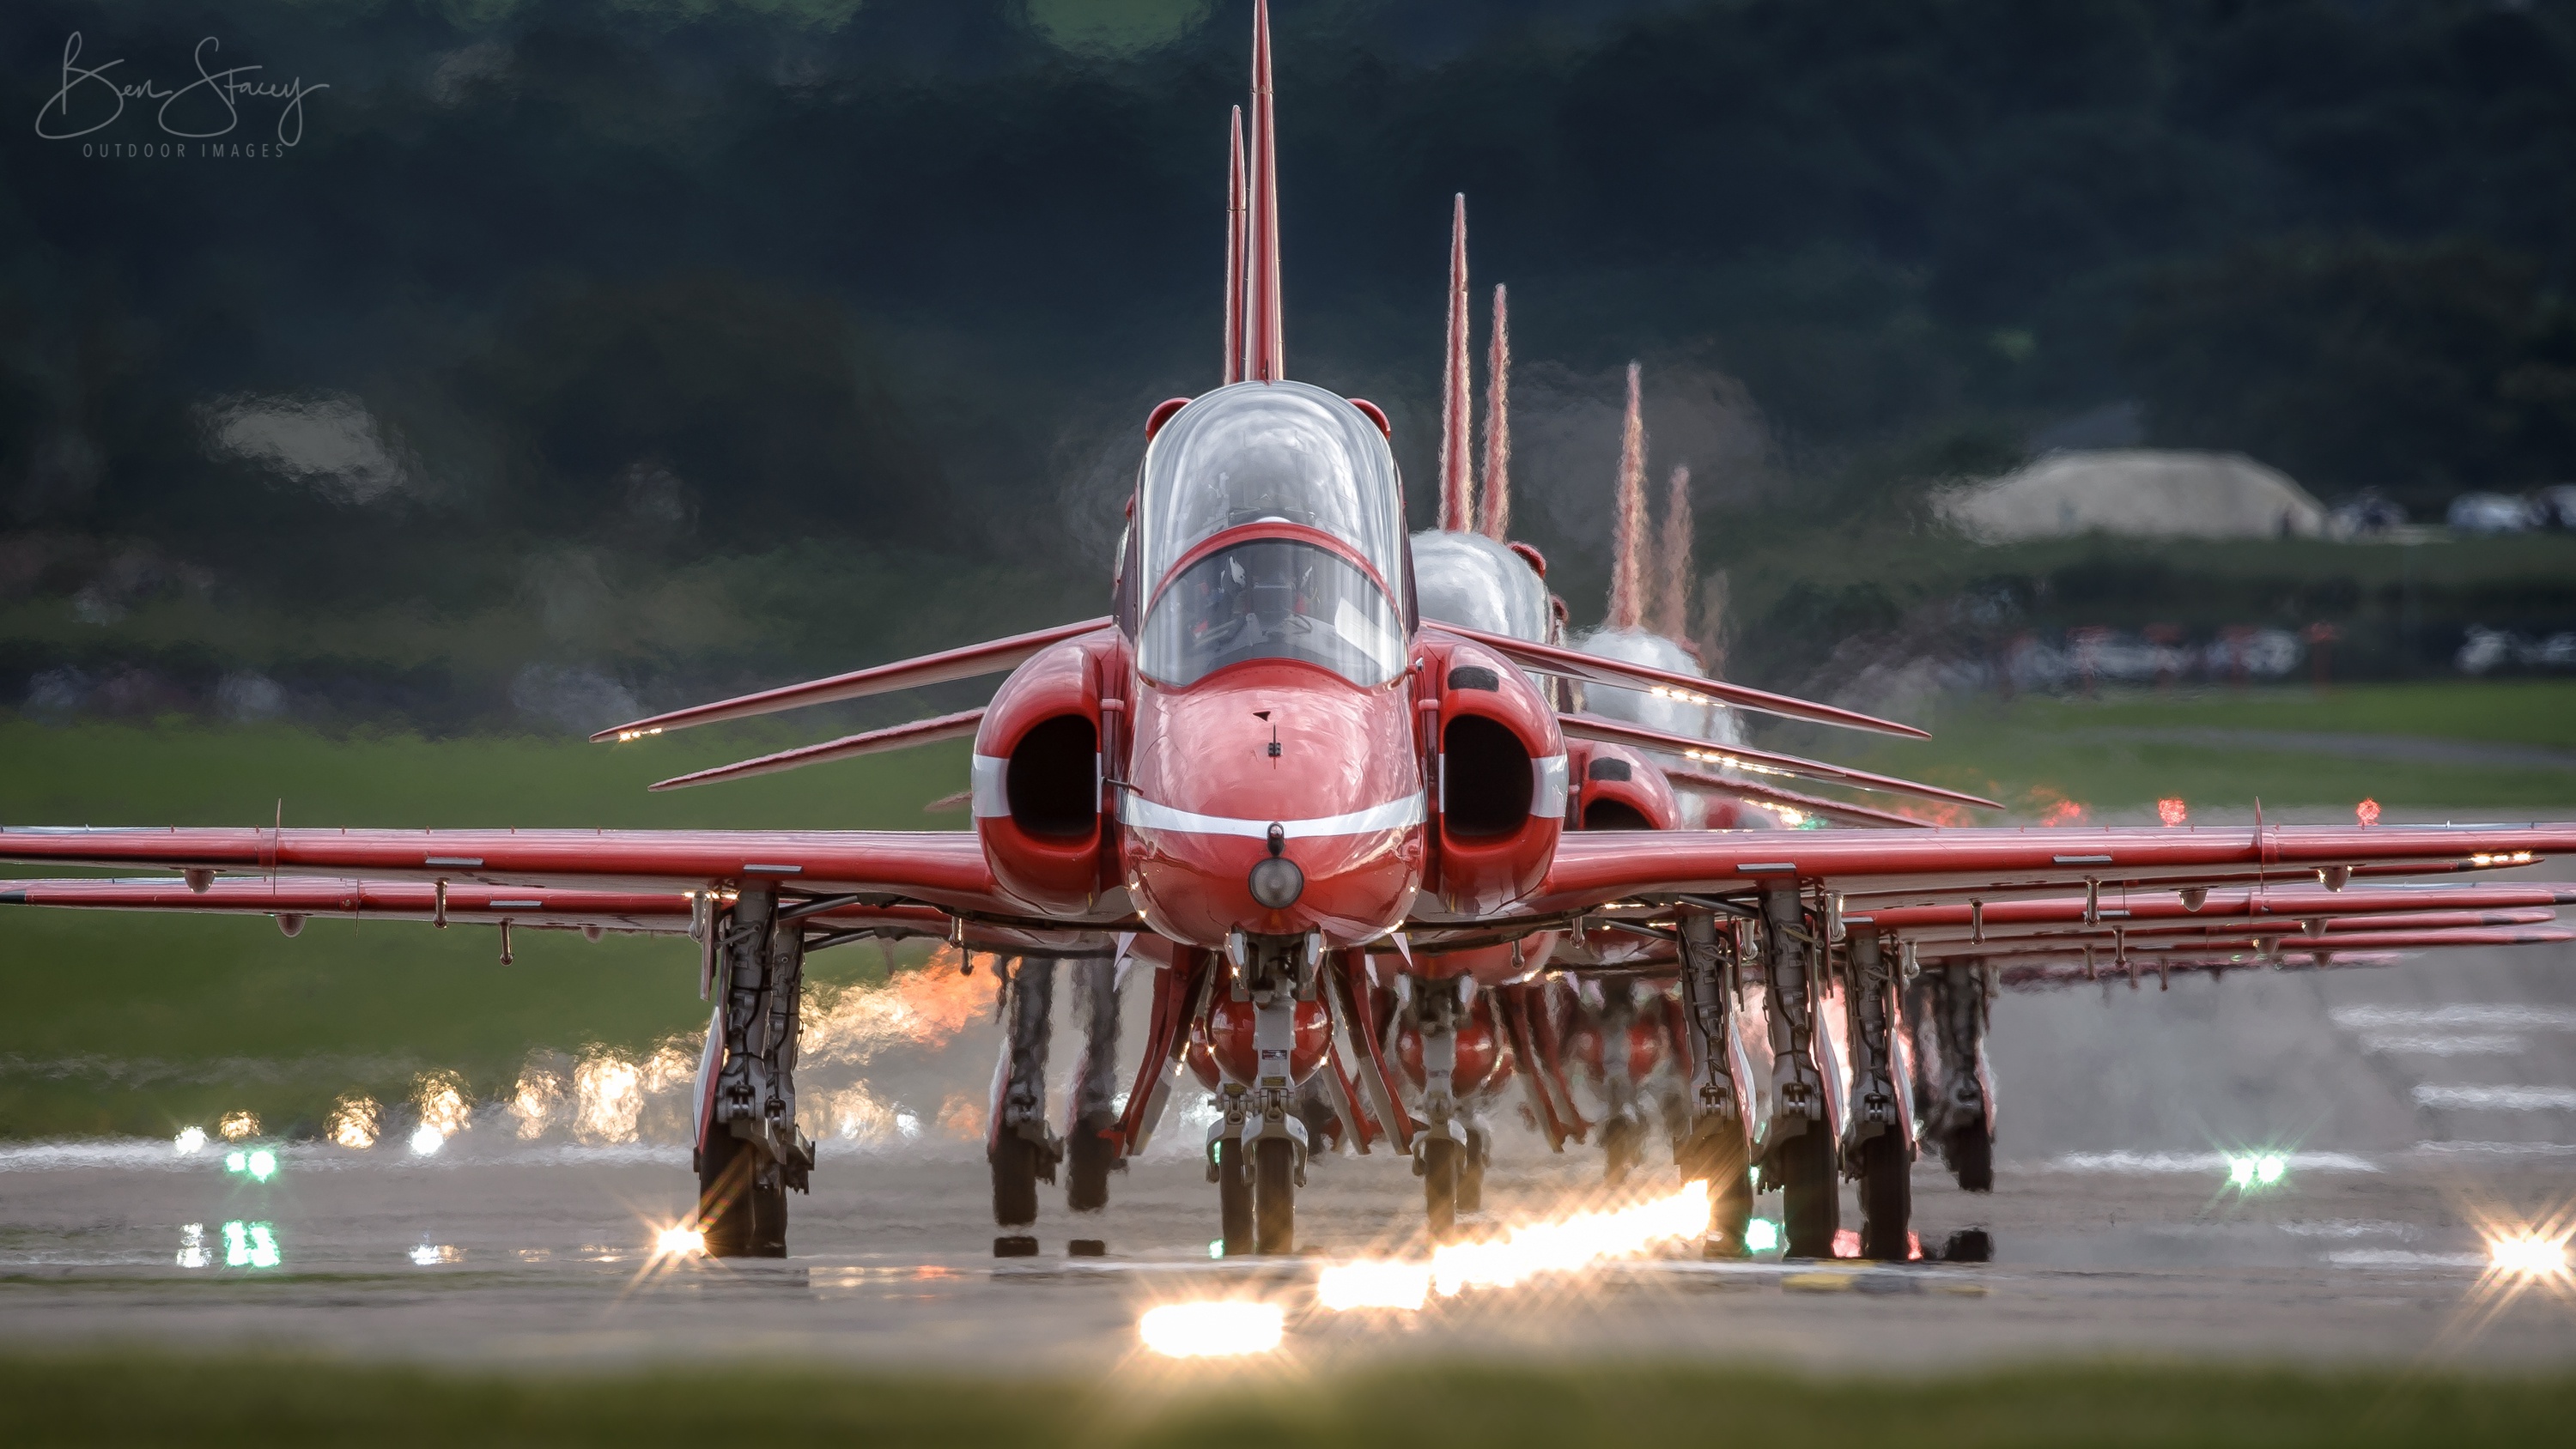 General 3000x1688 vehicle red aircraft Red arrows frontal view line-up military aircraft military Royal Air Force jets aerobatic team lights signature BAE Hawk Elephant Walk watermarked British aircraft